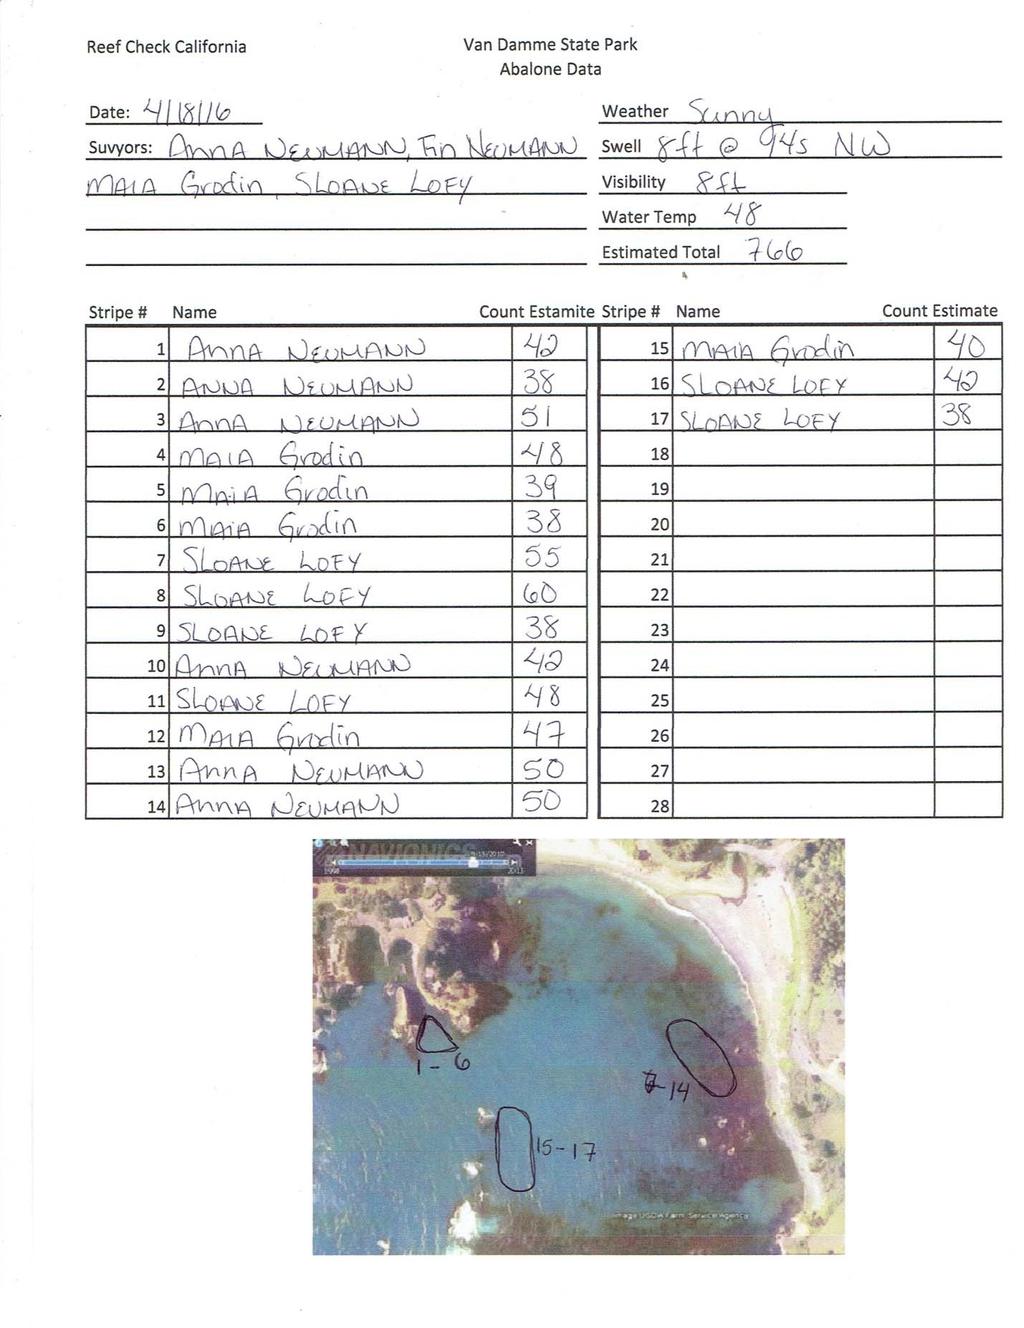 Figure 5: Sample Data Sheet Information includes site name, date, surveyor names, swell, weather, visibility, water temperature and